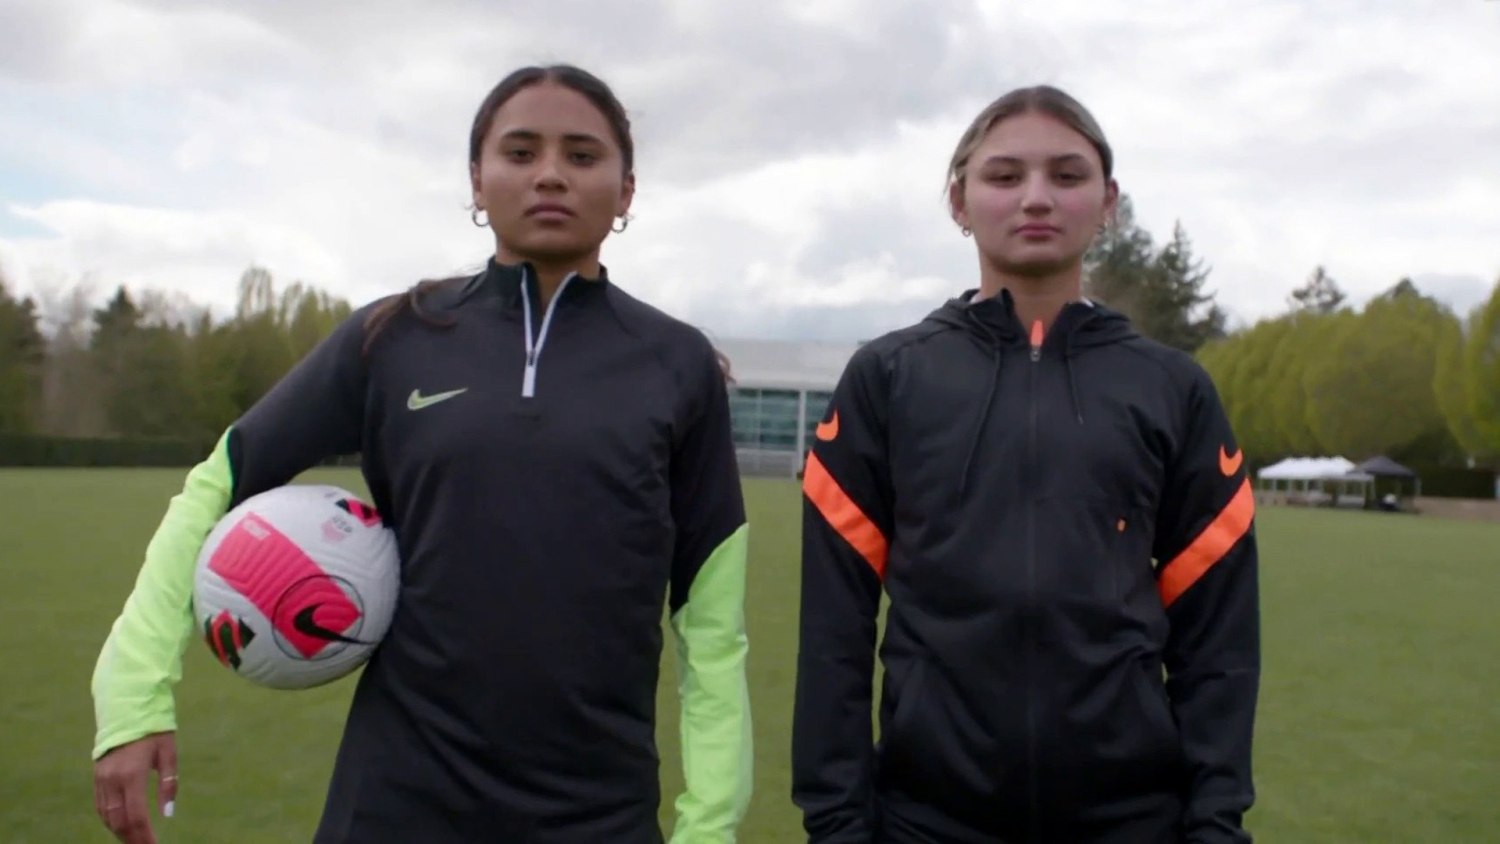 High Soccer Star Sisters Reflect on Historic Nike Deal